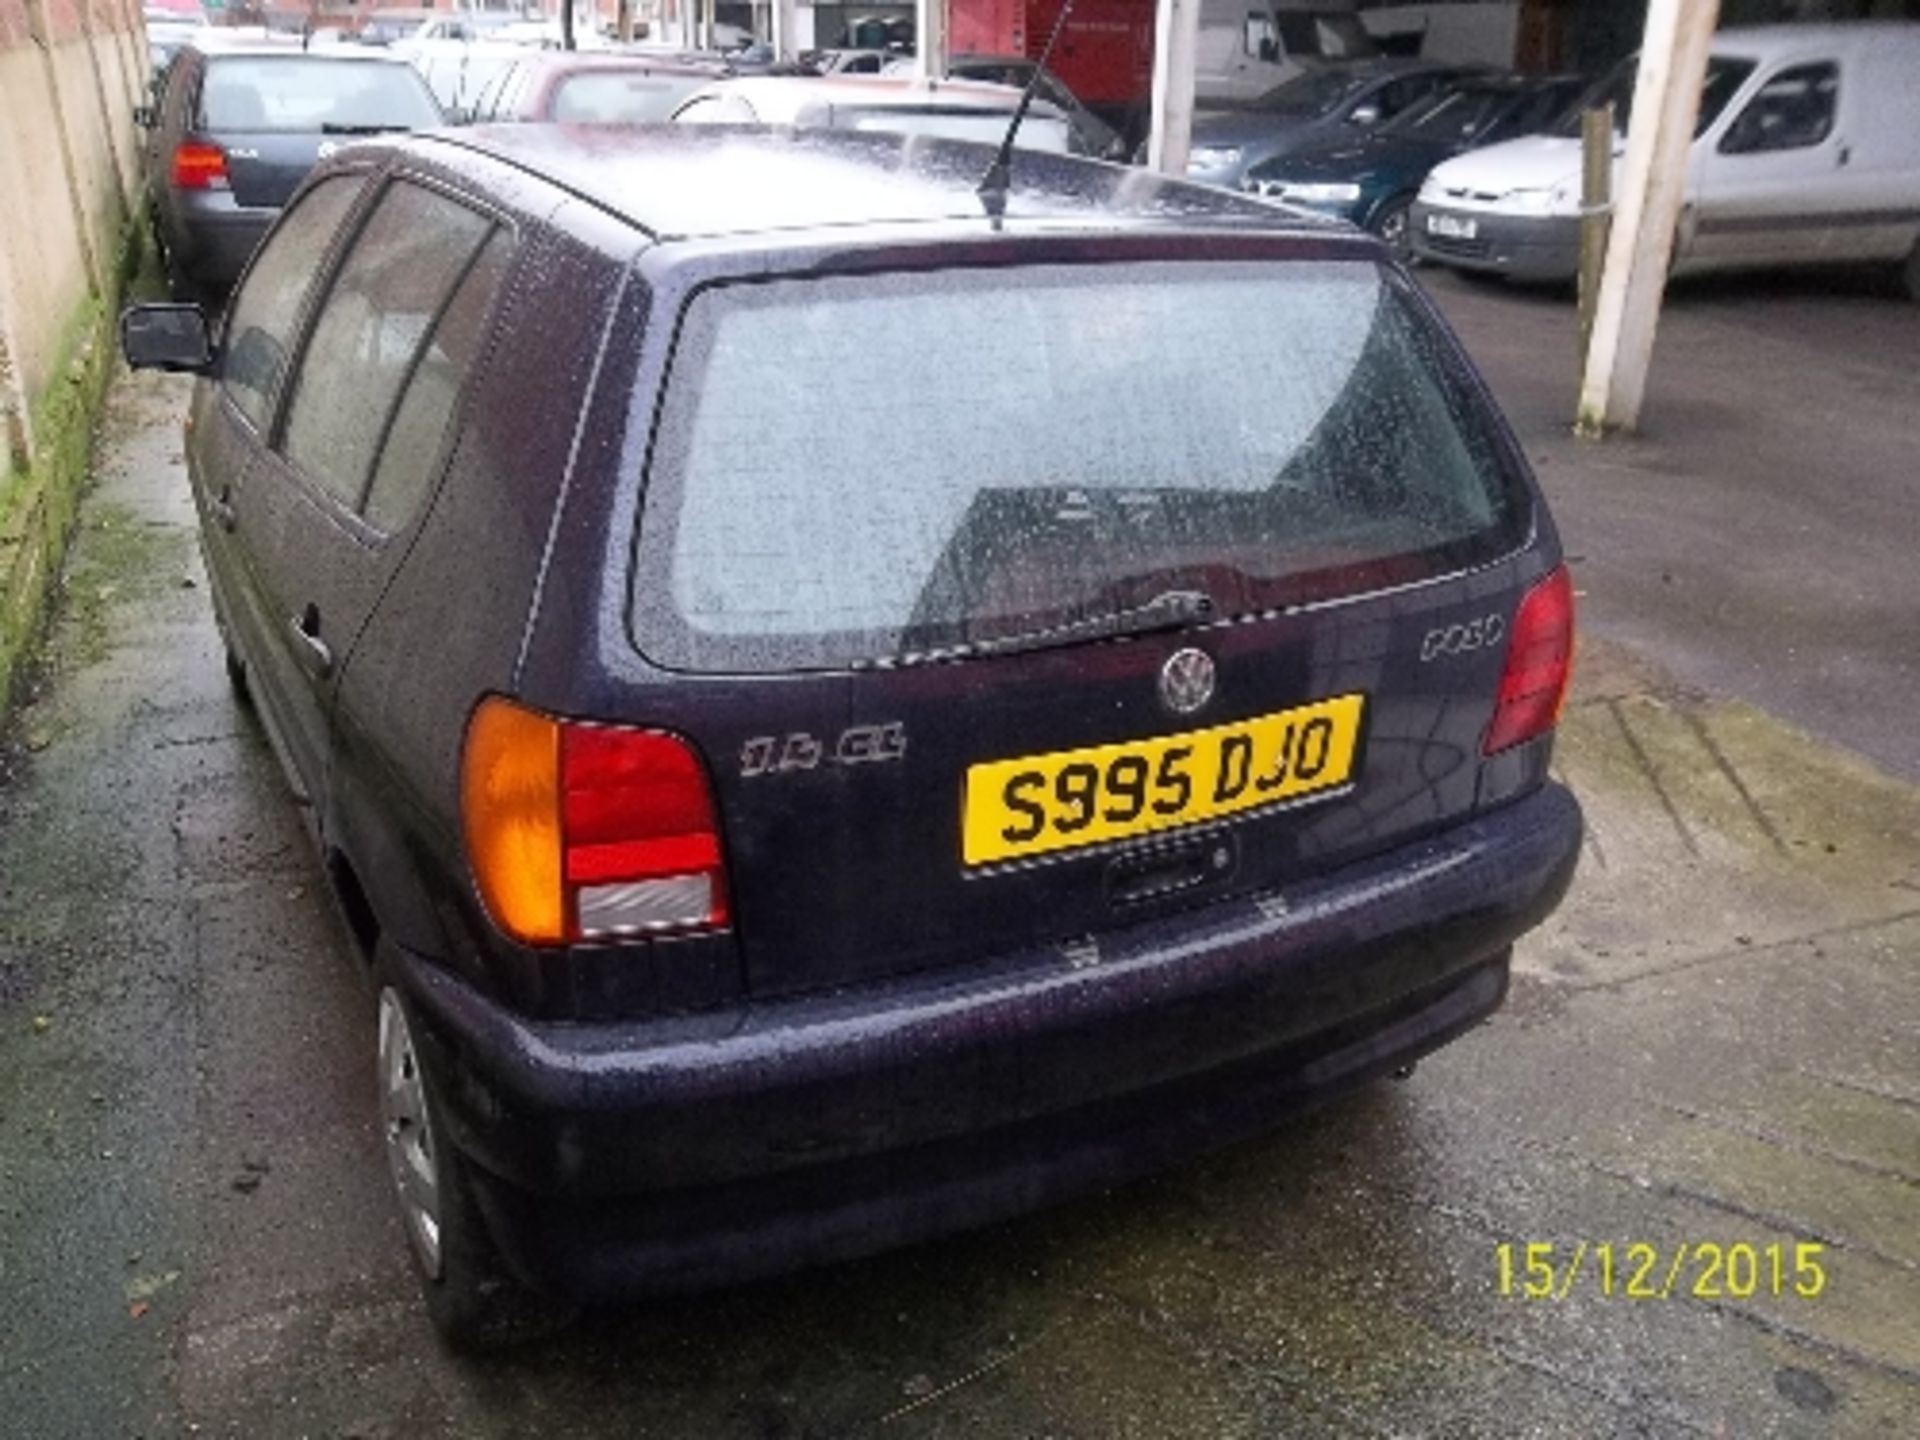 Volkswagen Polo 1.4 CL - S995 DJO Date of registration:  30.09.1998 1390cc, petrol, manual, blue - Image 3 of 4